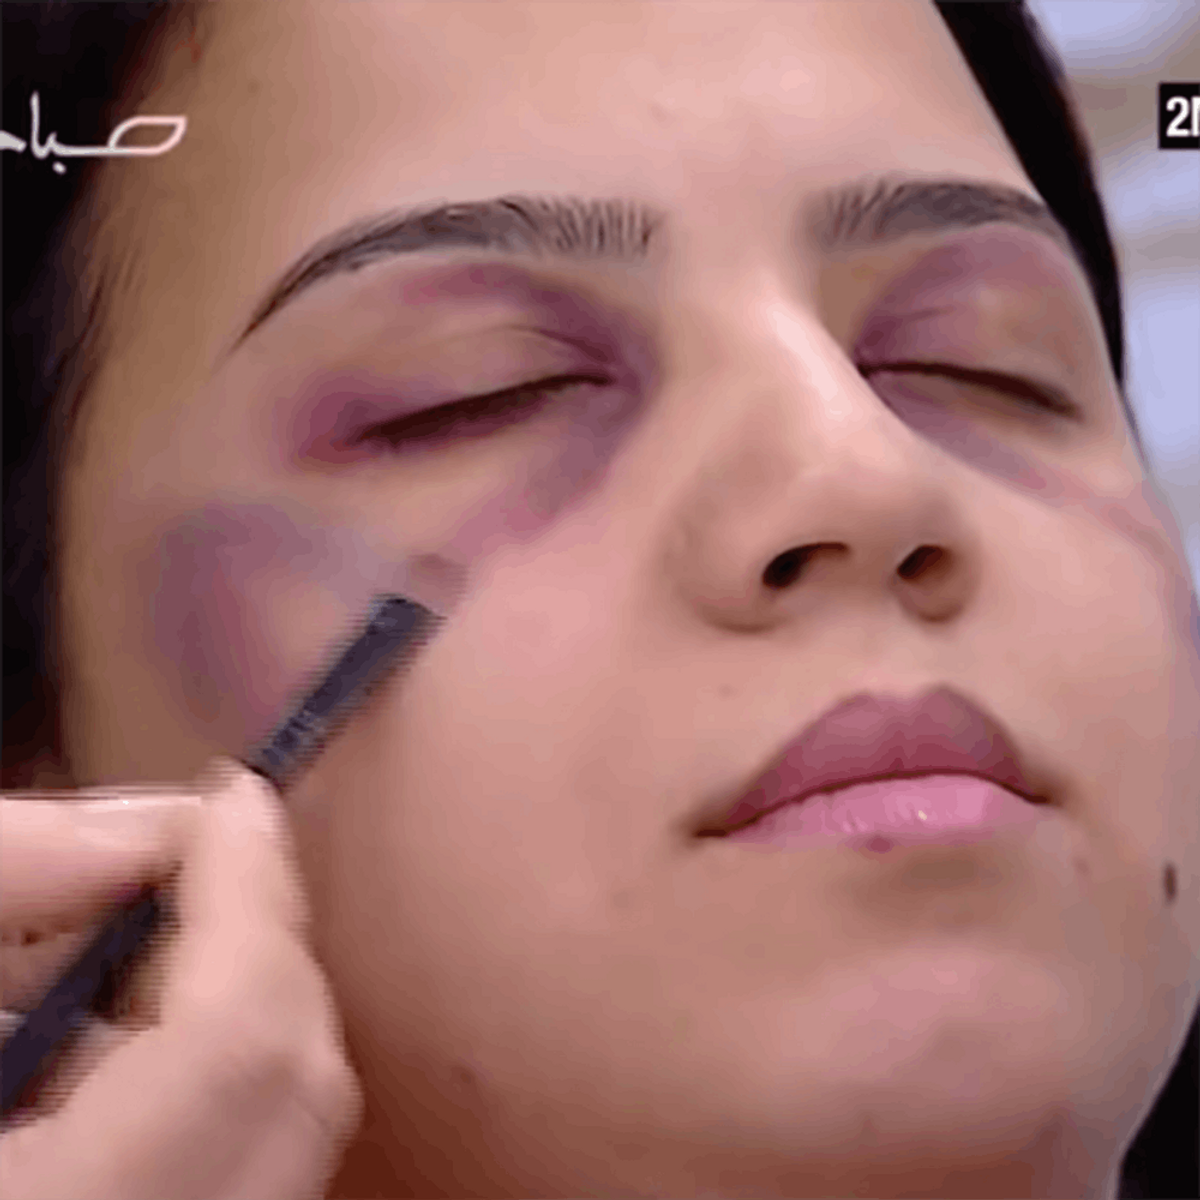 Women Around the World Are Outraged Over This Makeup Tutorial